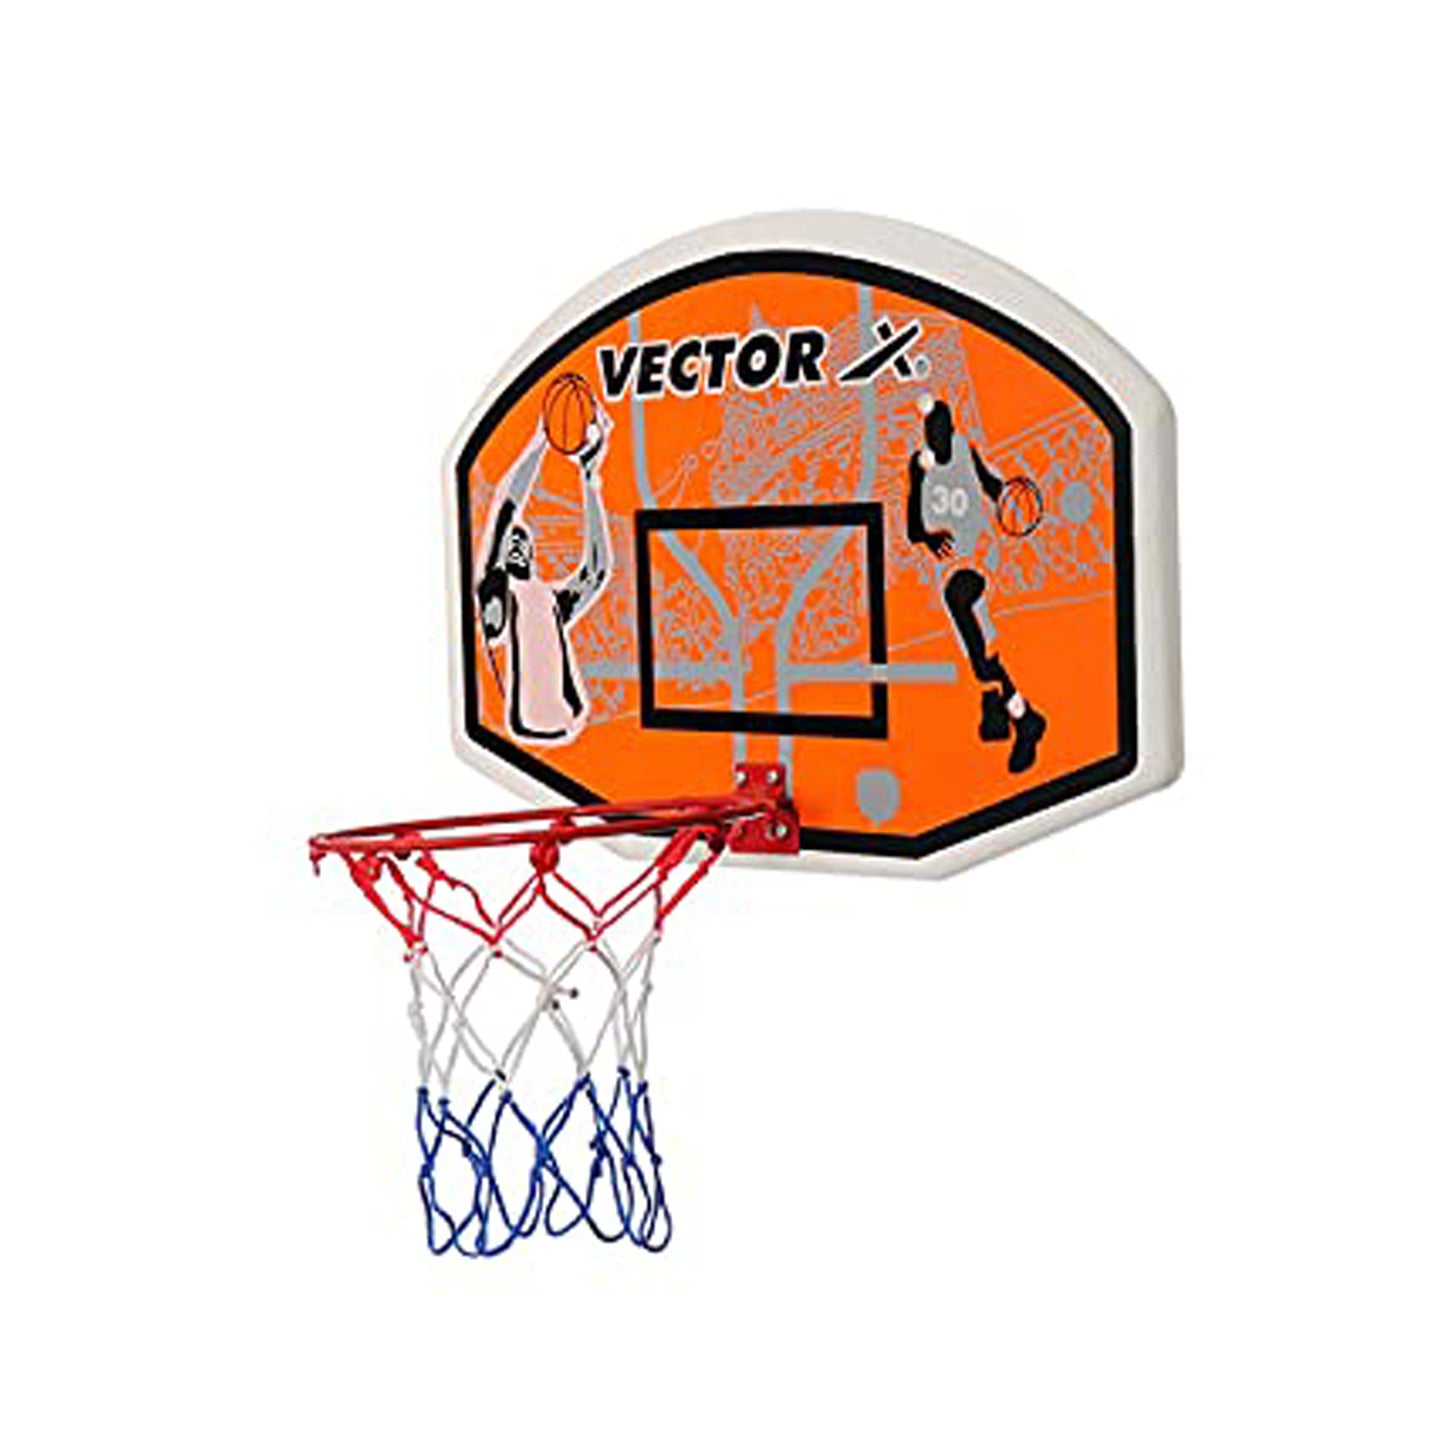 Vector X Basketball Board and Ring XL - Best Price online Prokicksports.com